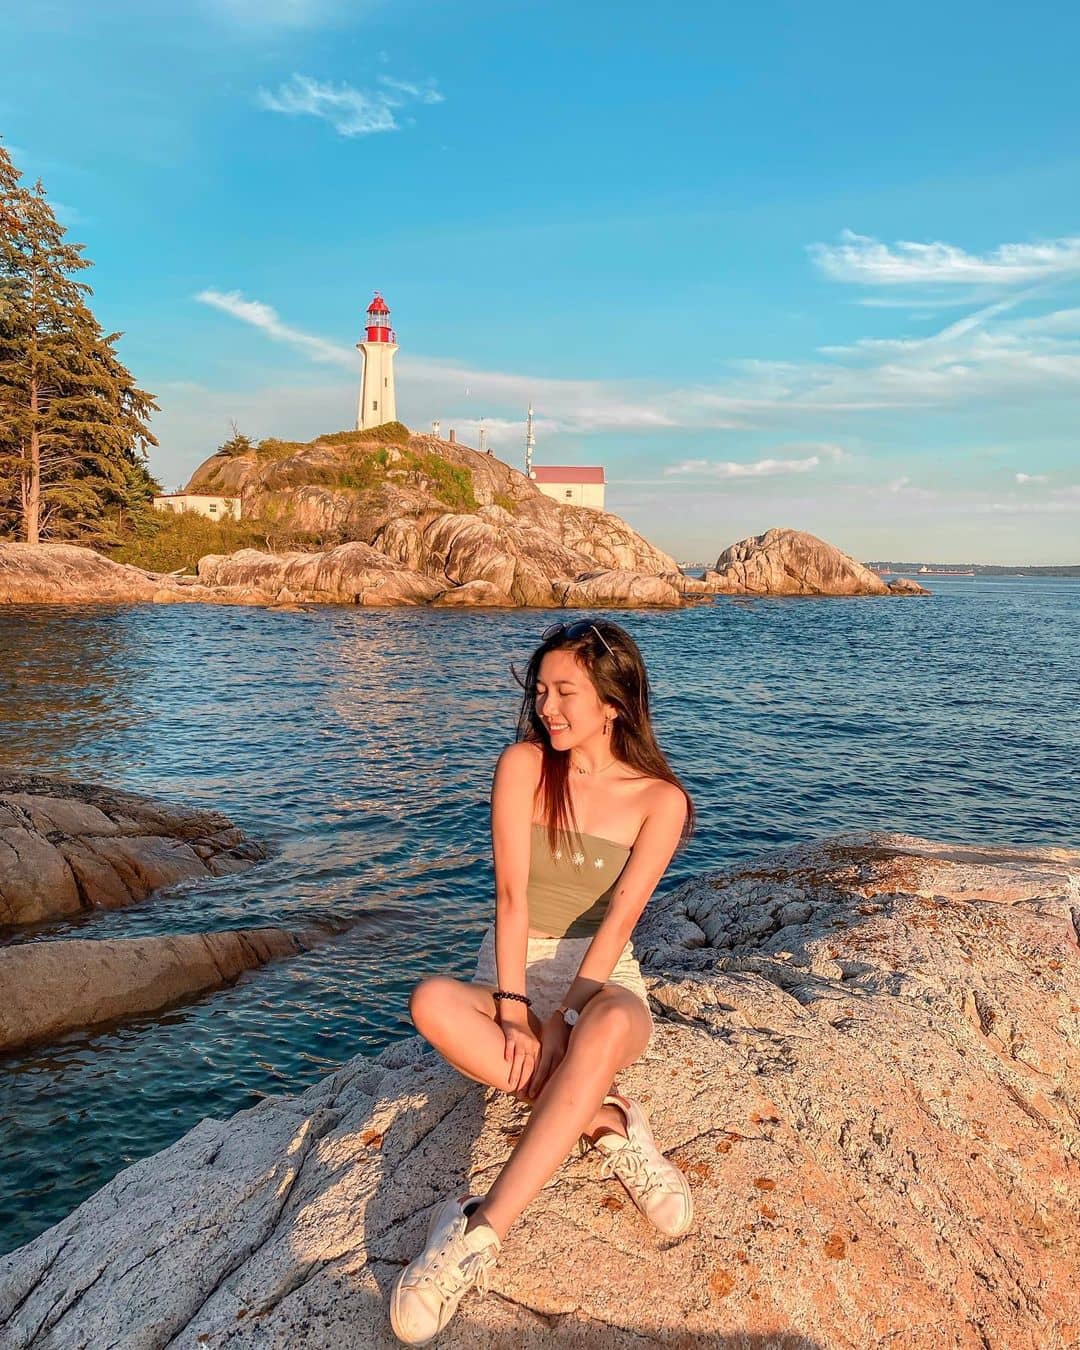 Vancouver hidden gems - lighthouse park view with girl sitting